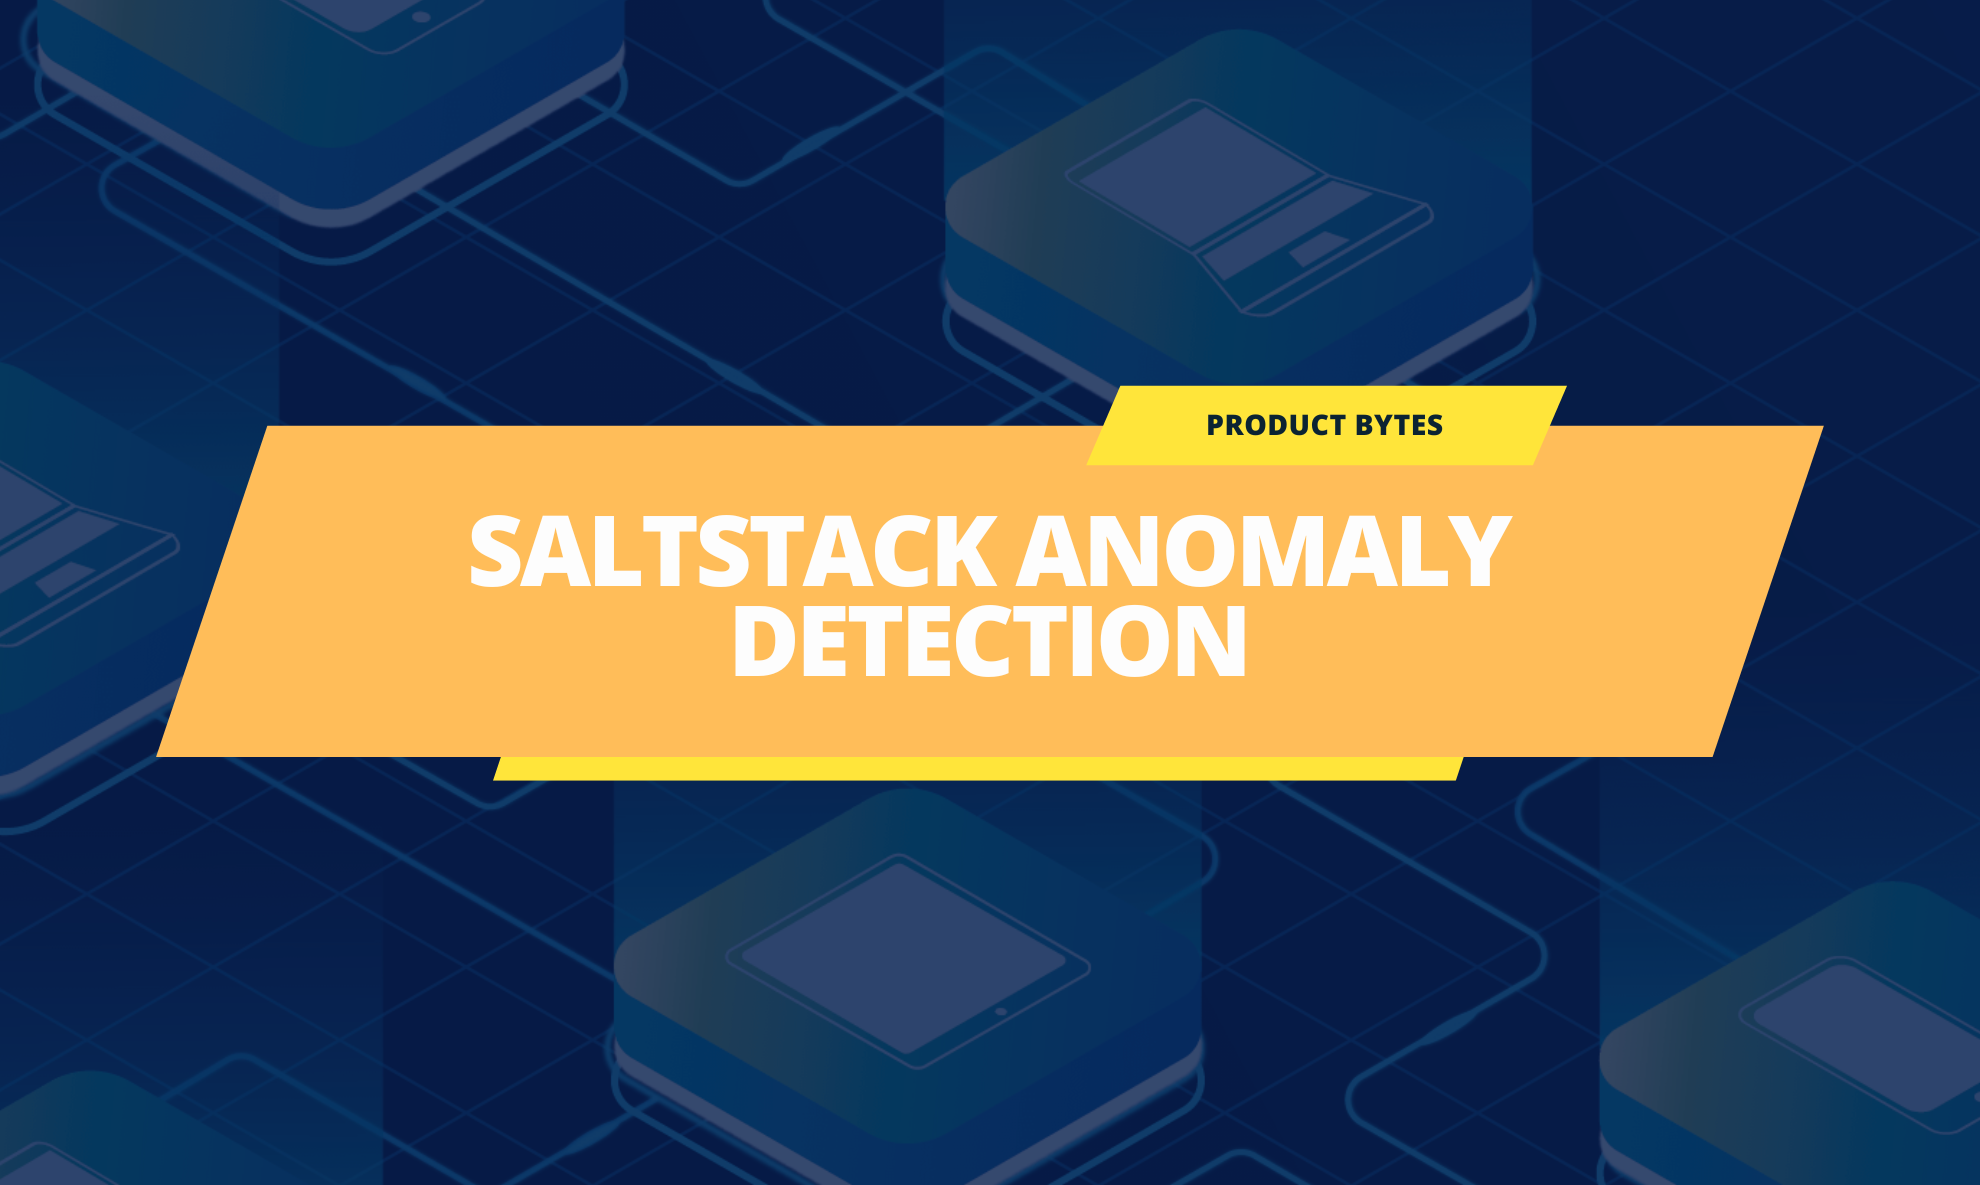 SaltStack anomaly detection and root cause analysis